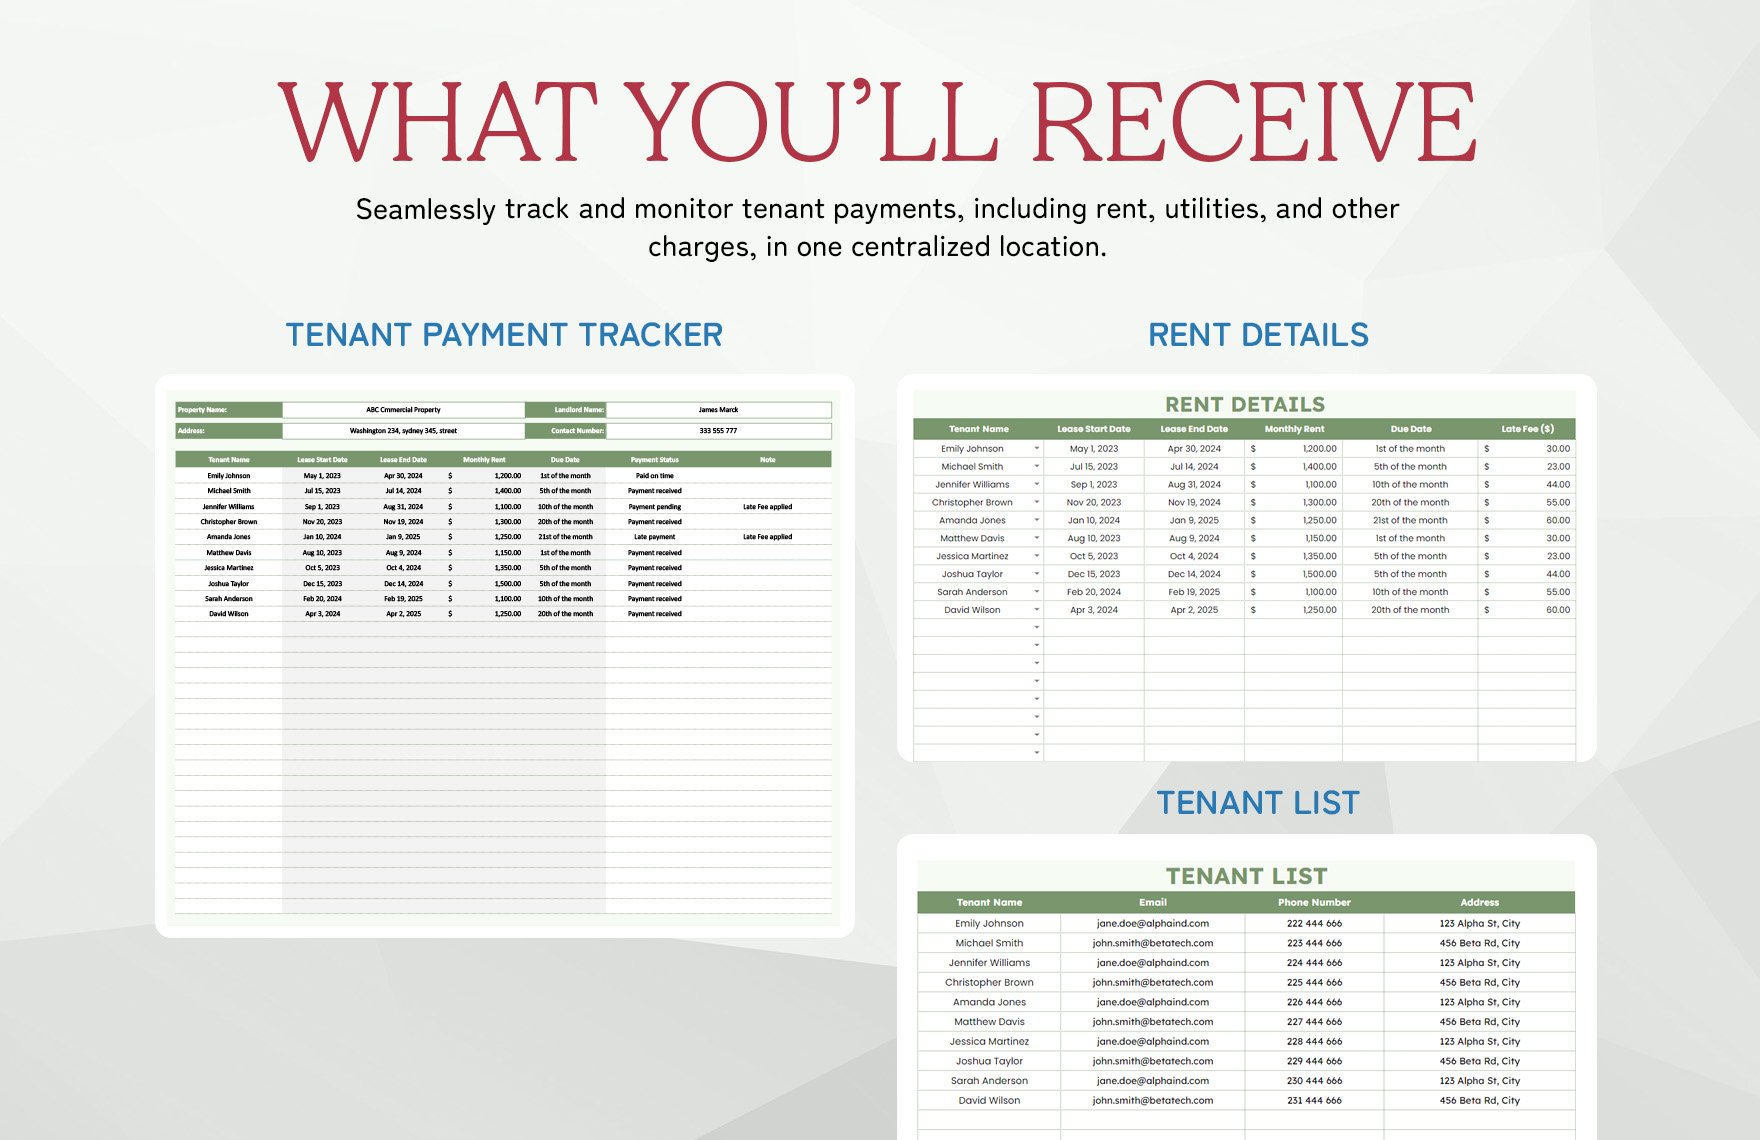 Tenant Payment Tracker Template